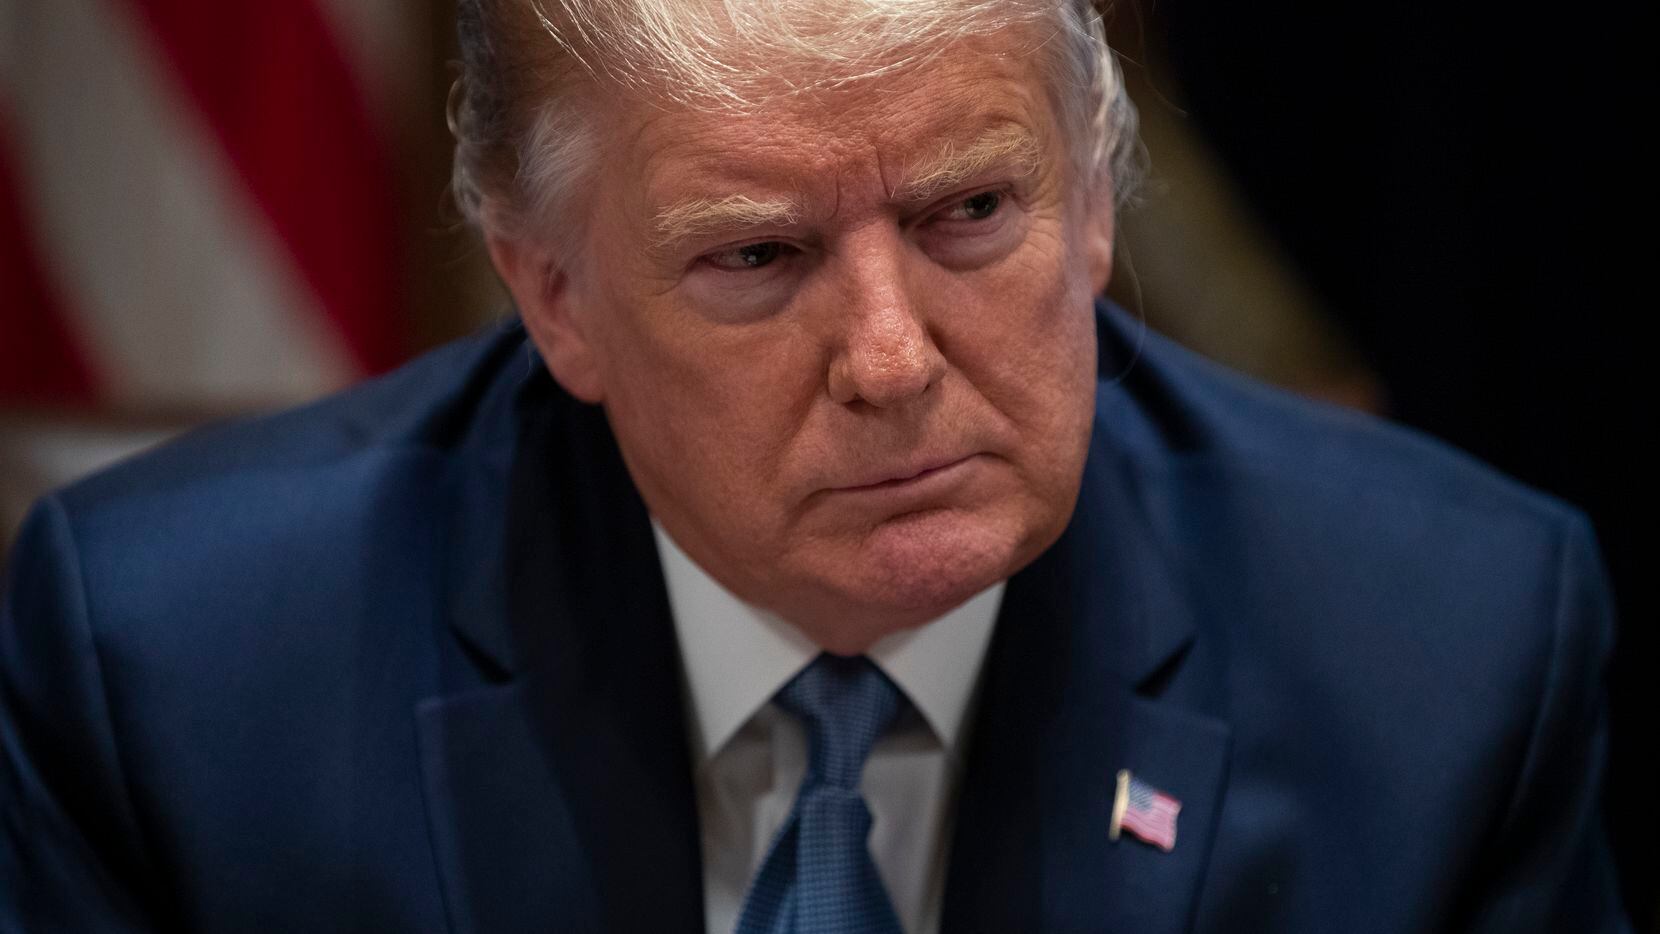 President Donald Trump listens during a roundtable with governors on government regulations in the Cabinet Room of the White House, Monday, Dec. 16, 2019, in Washington.